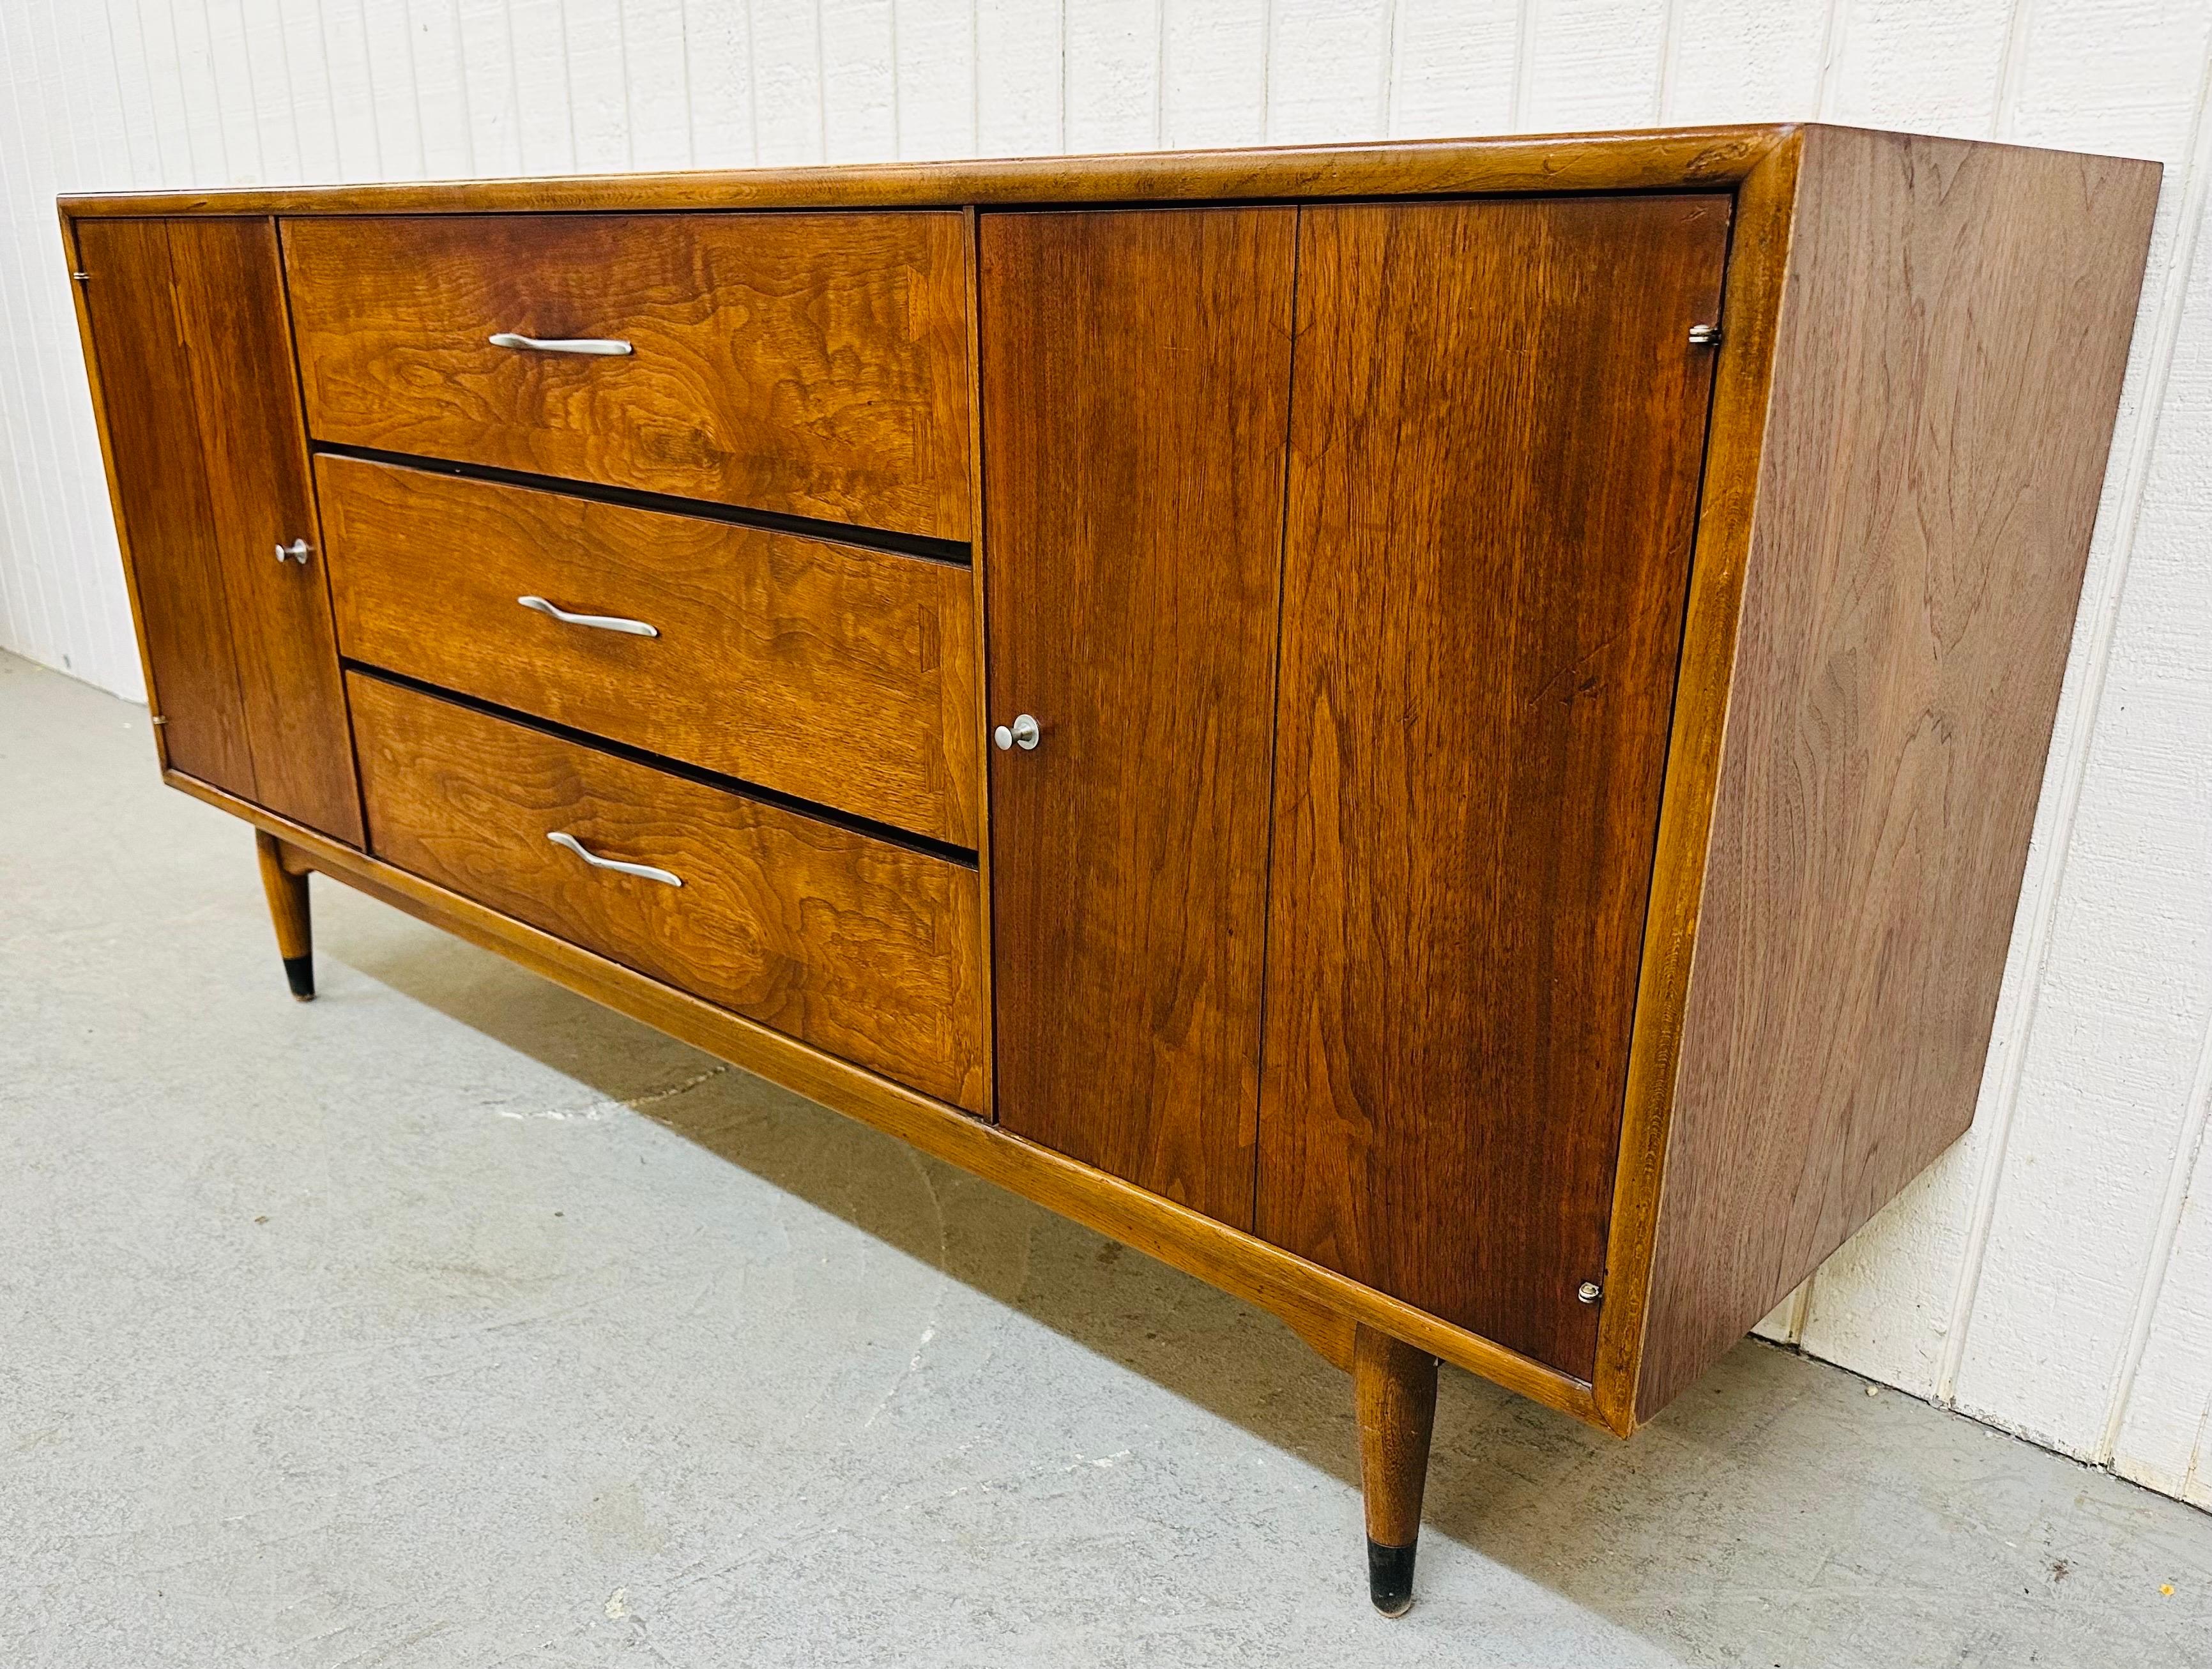 This listing is for a Mid-Century Modern Lane Acclaim Walnut Sideboard. Featuring a straight line design, beautiful walnut rectangular top, two doors that open up to storage space, three large drawers in the center, and original chrome hardware.